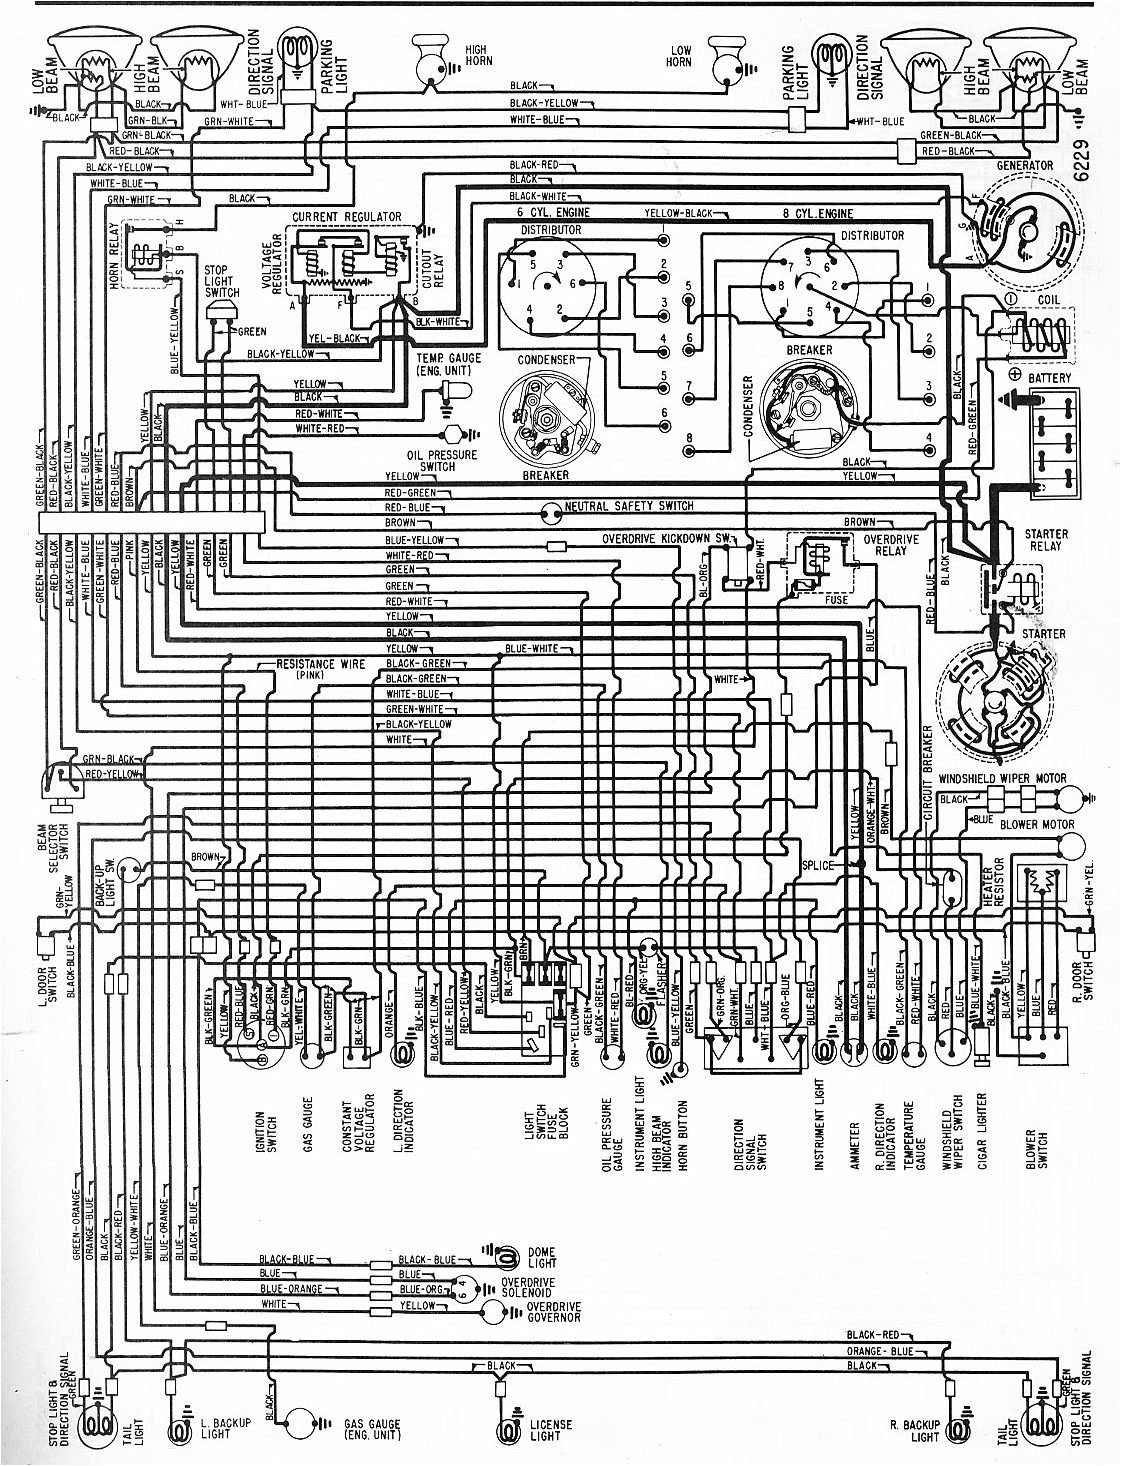 1961 ford f100 wiring diagram wiring diagrams place 1975 ford f100 wiring diagram beautiful 1961 ford